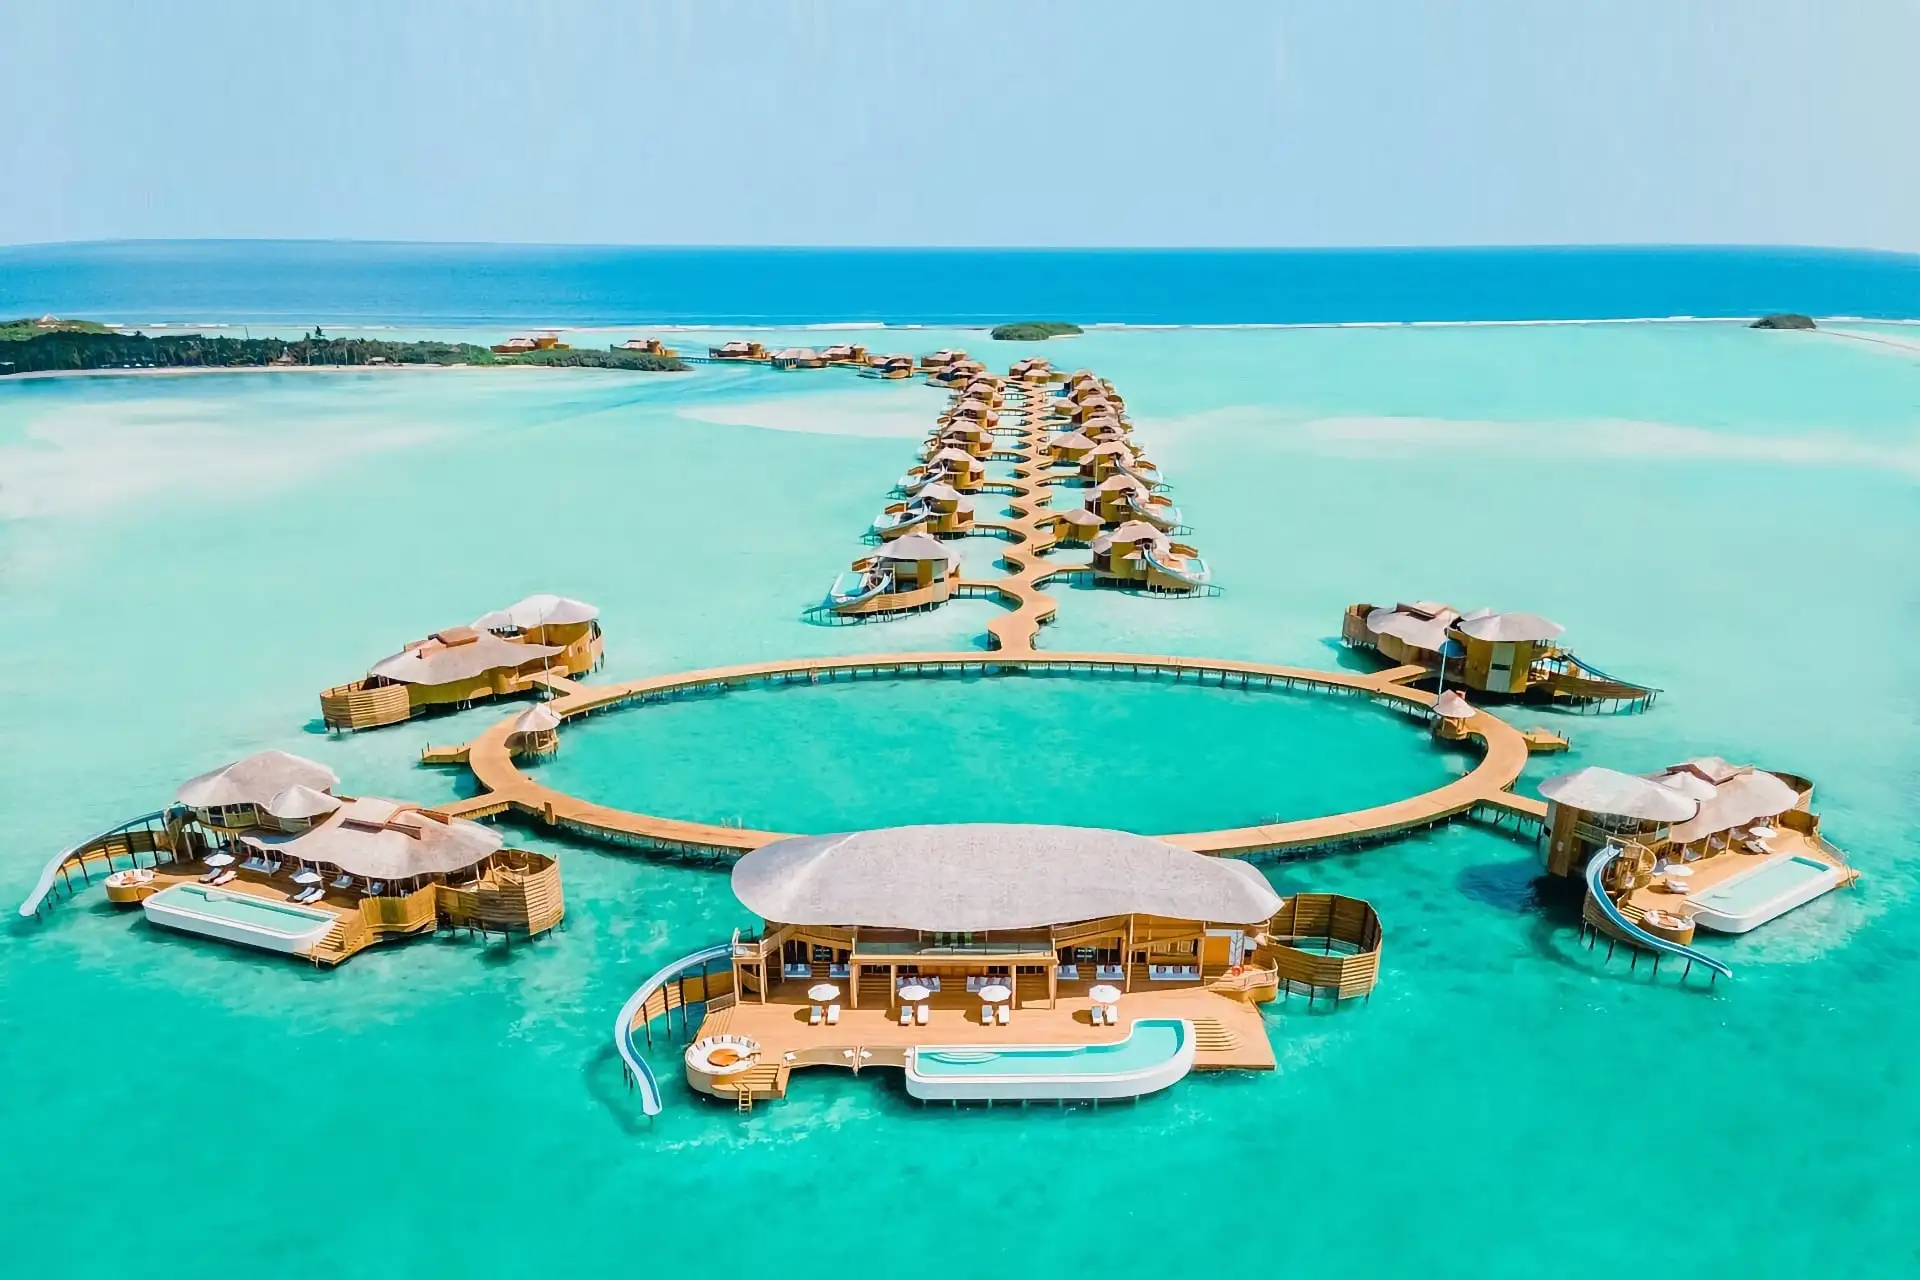 world's best overwater bungalows and beach huts